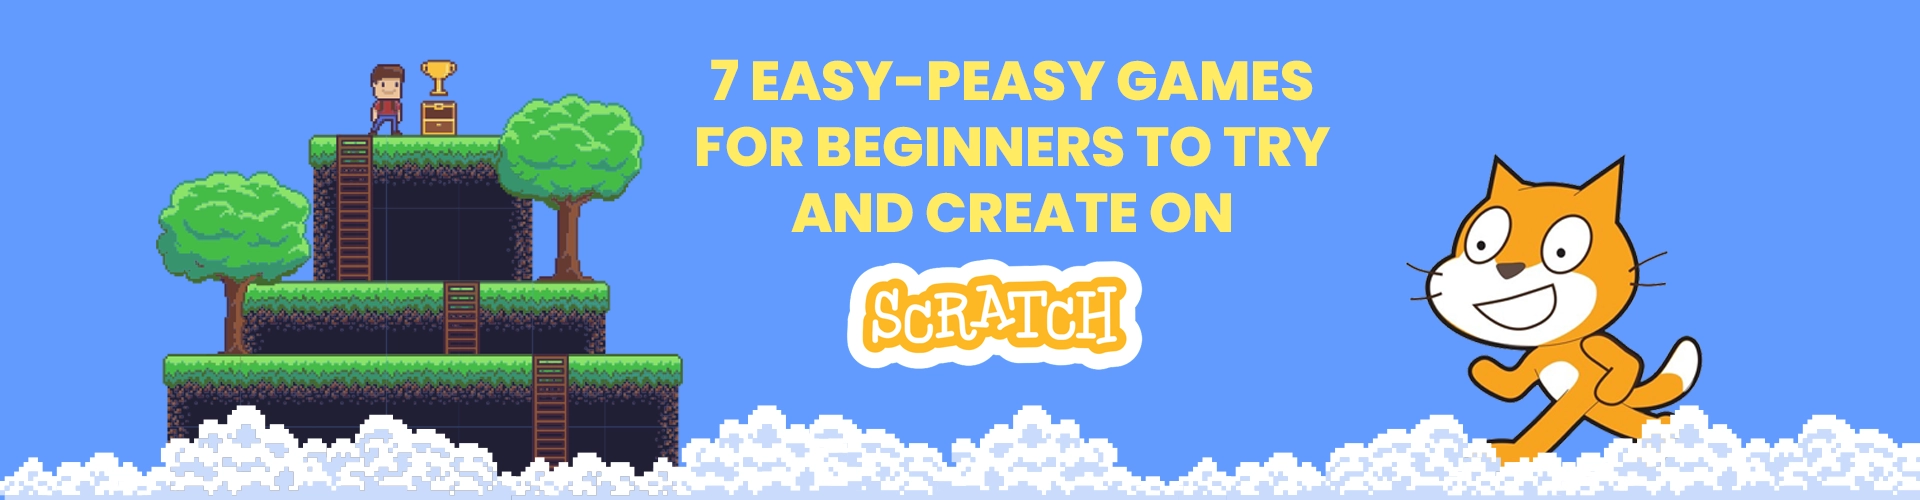 Games for Beginners to Try and Create On Scratch